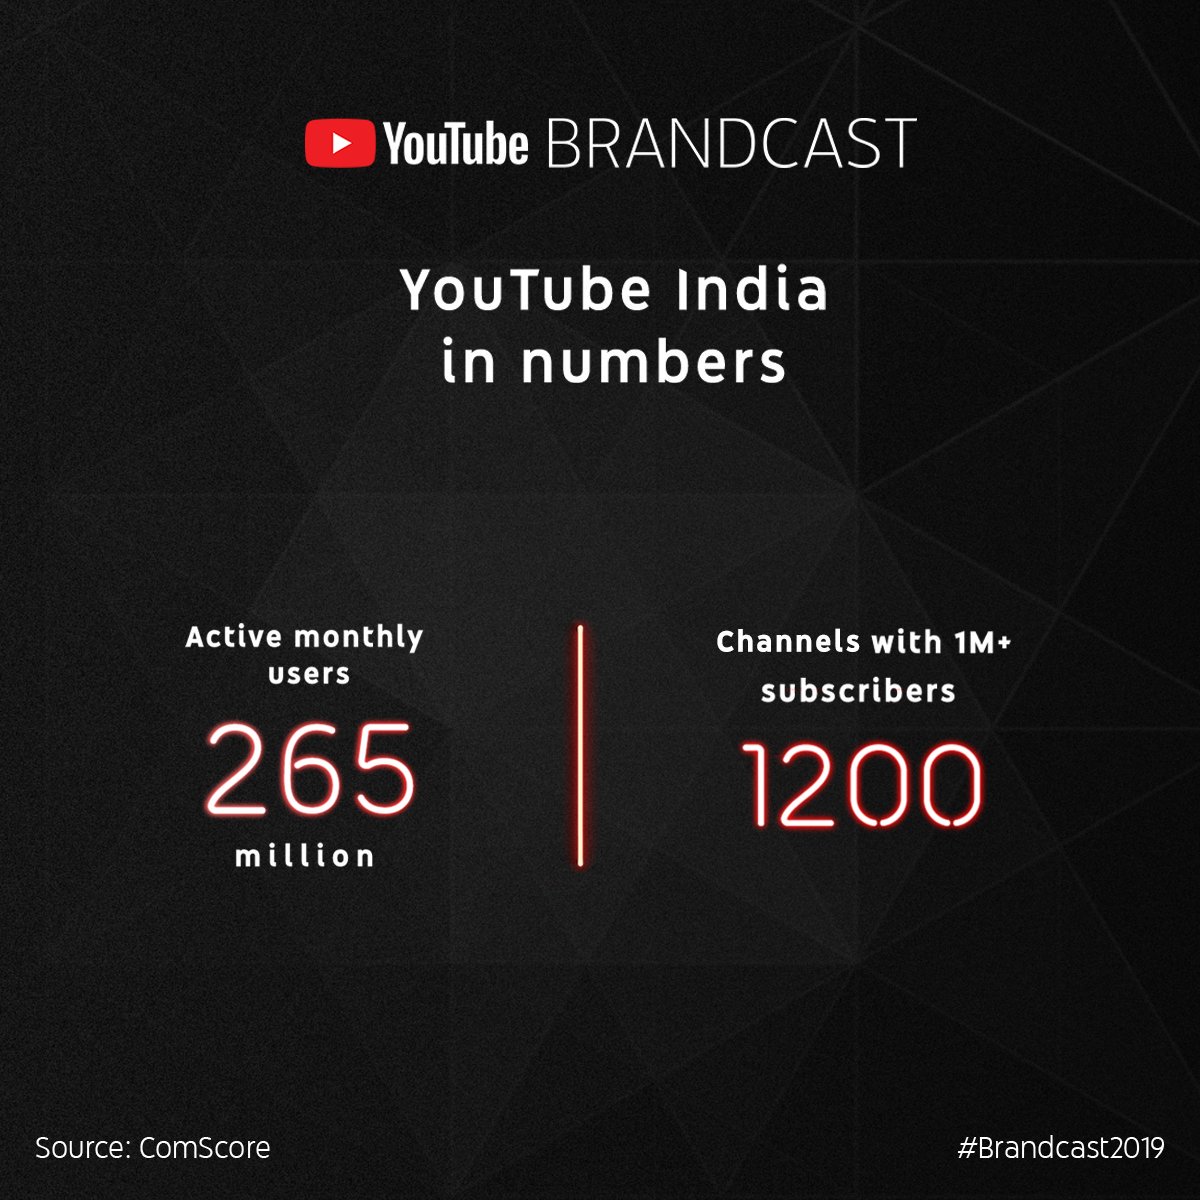 India is now YouTube's biggest and fastest growing audience in the world. #Brandcast2019